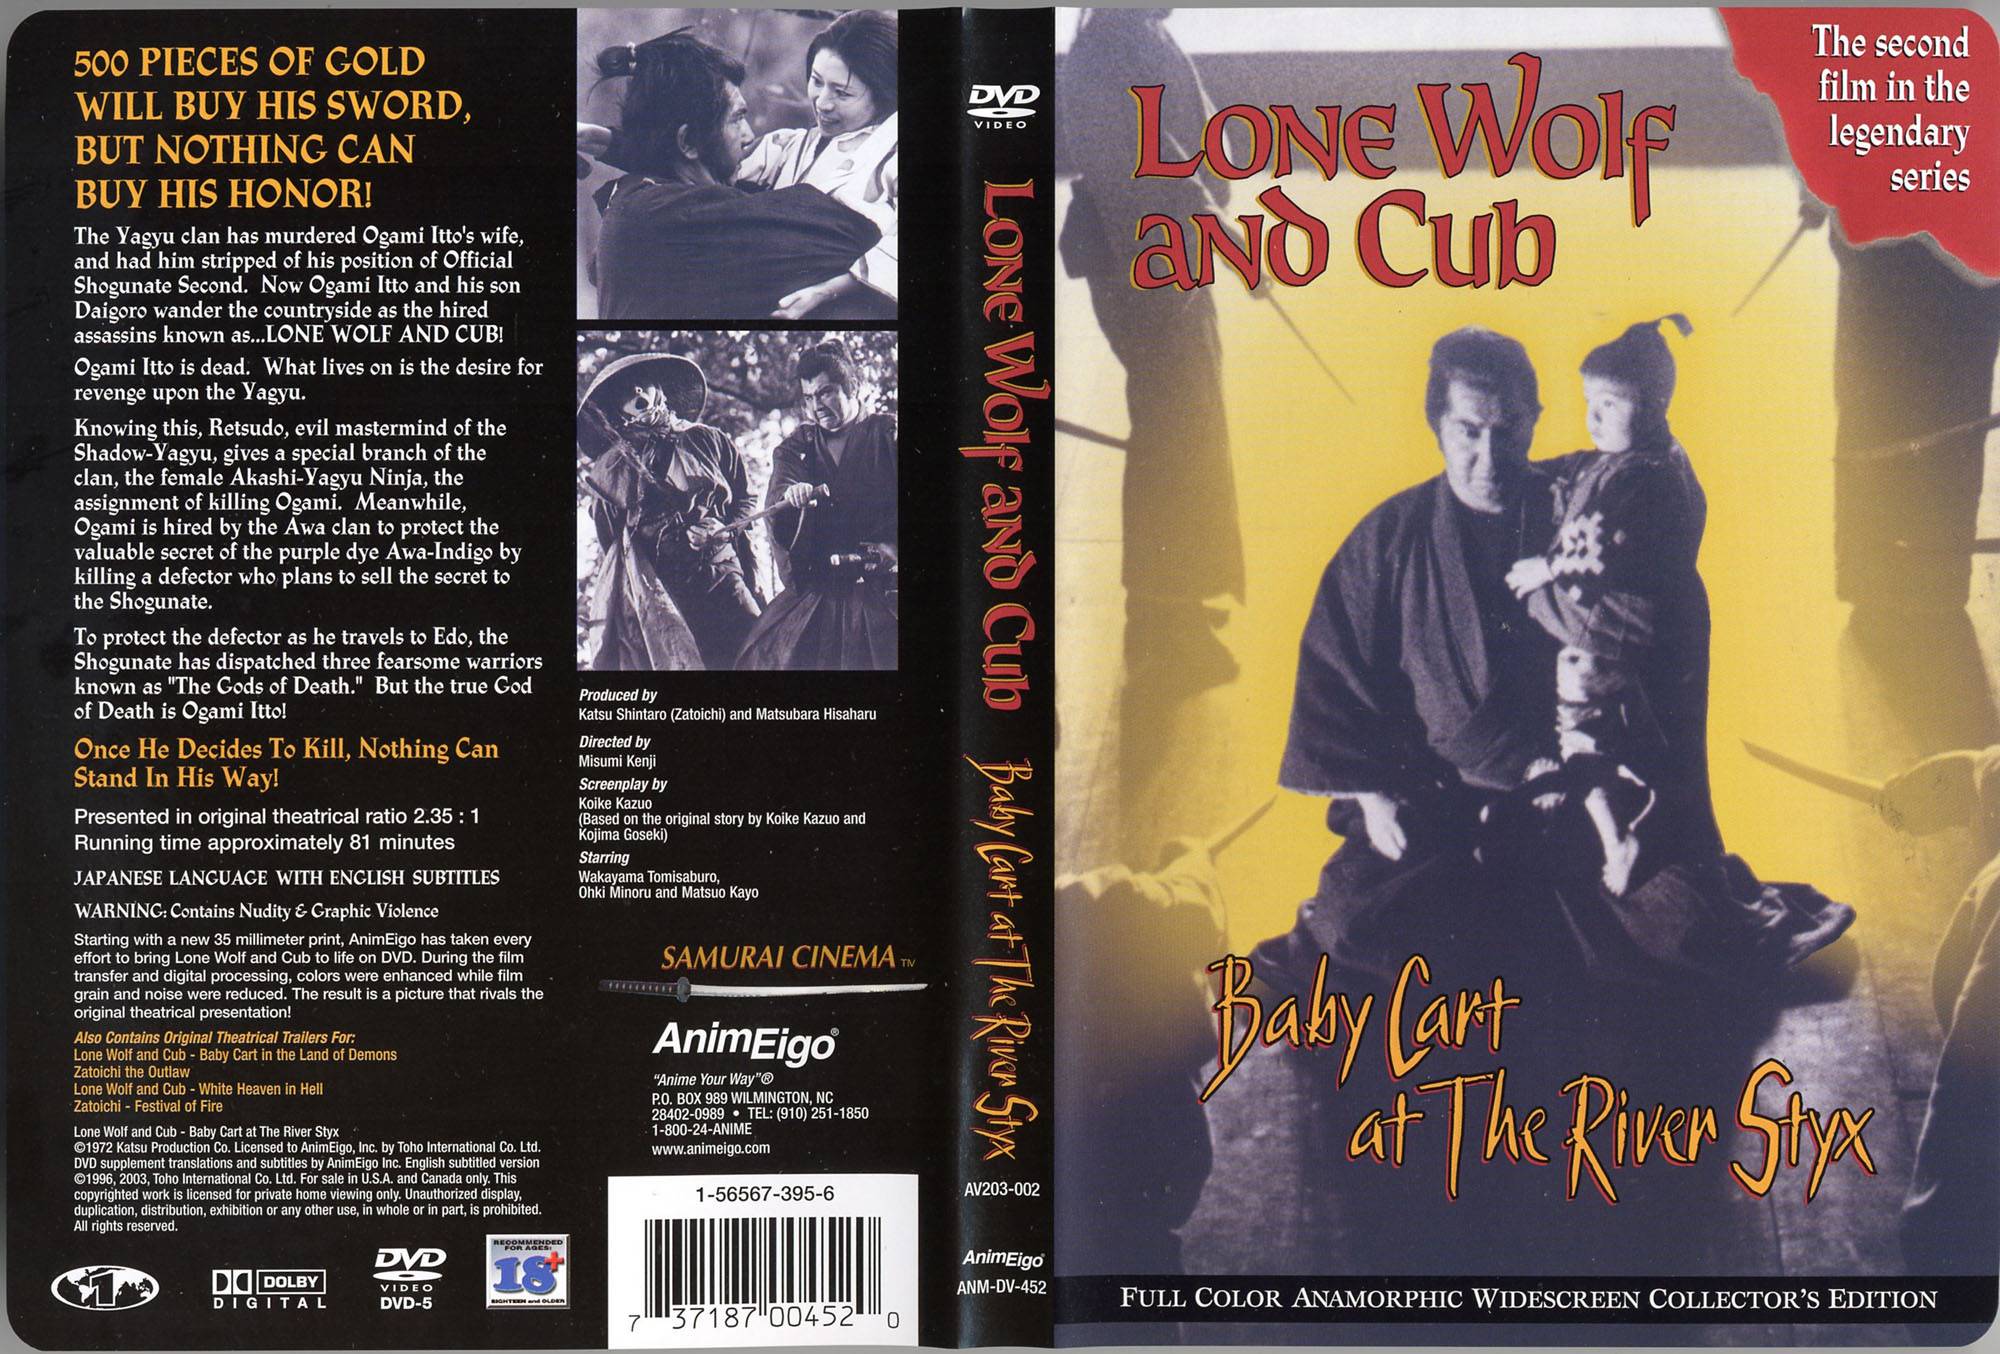 Lone Wolf and Cub: Baby Cart at the River Styx (DVD Cover ...